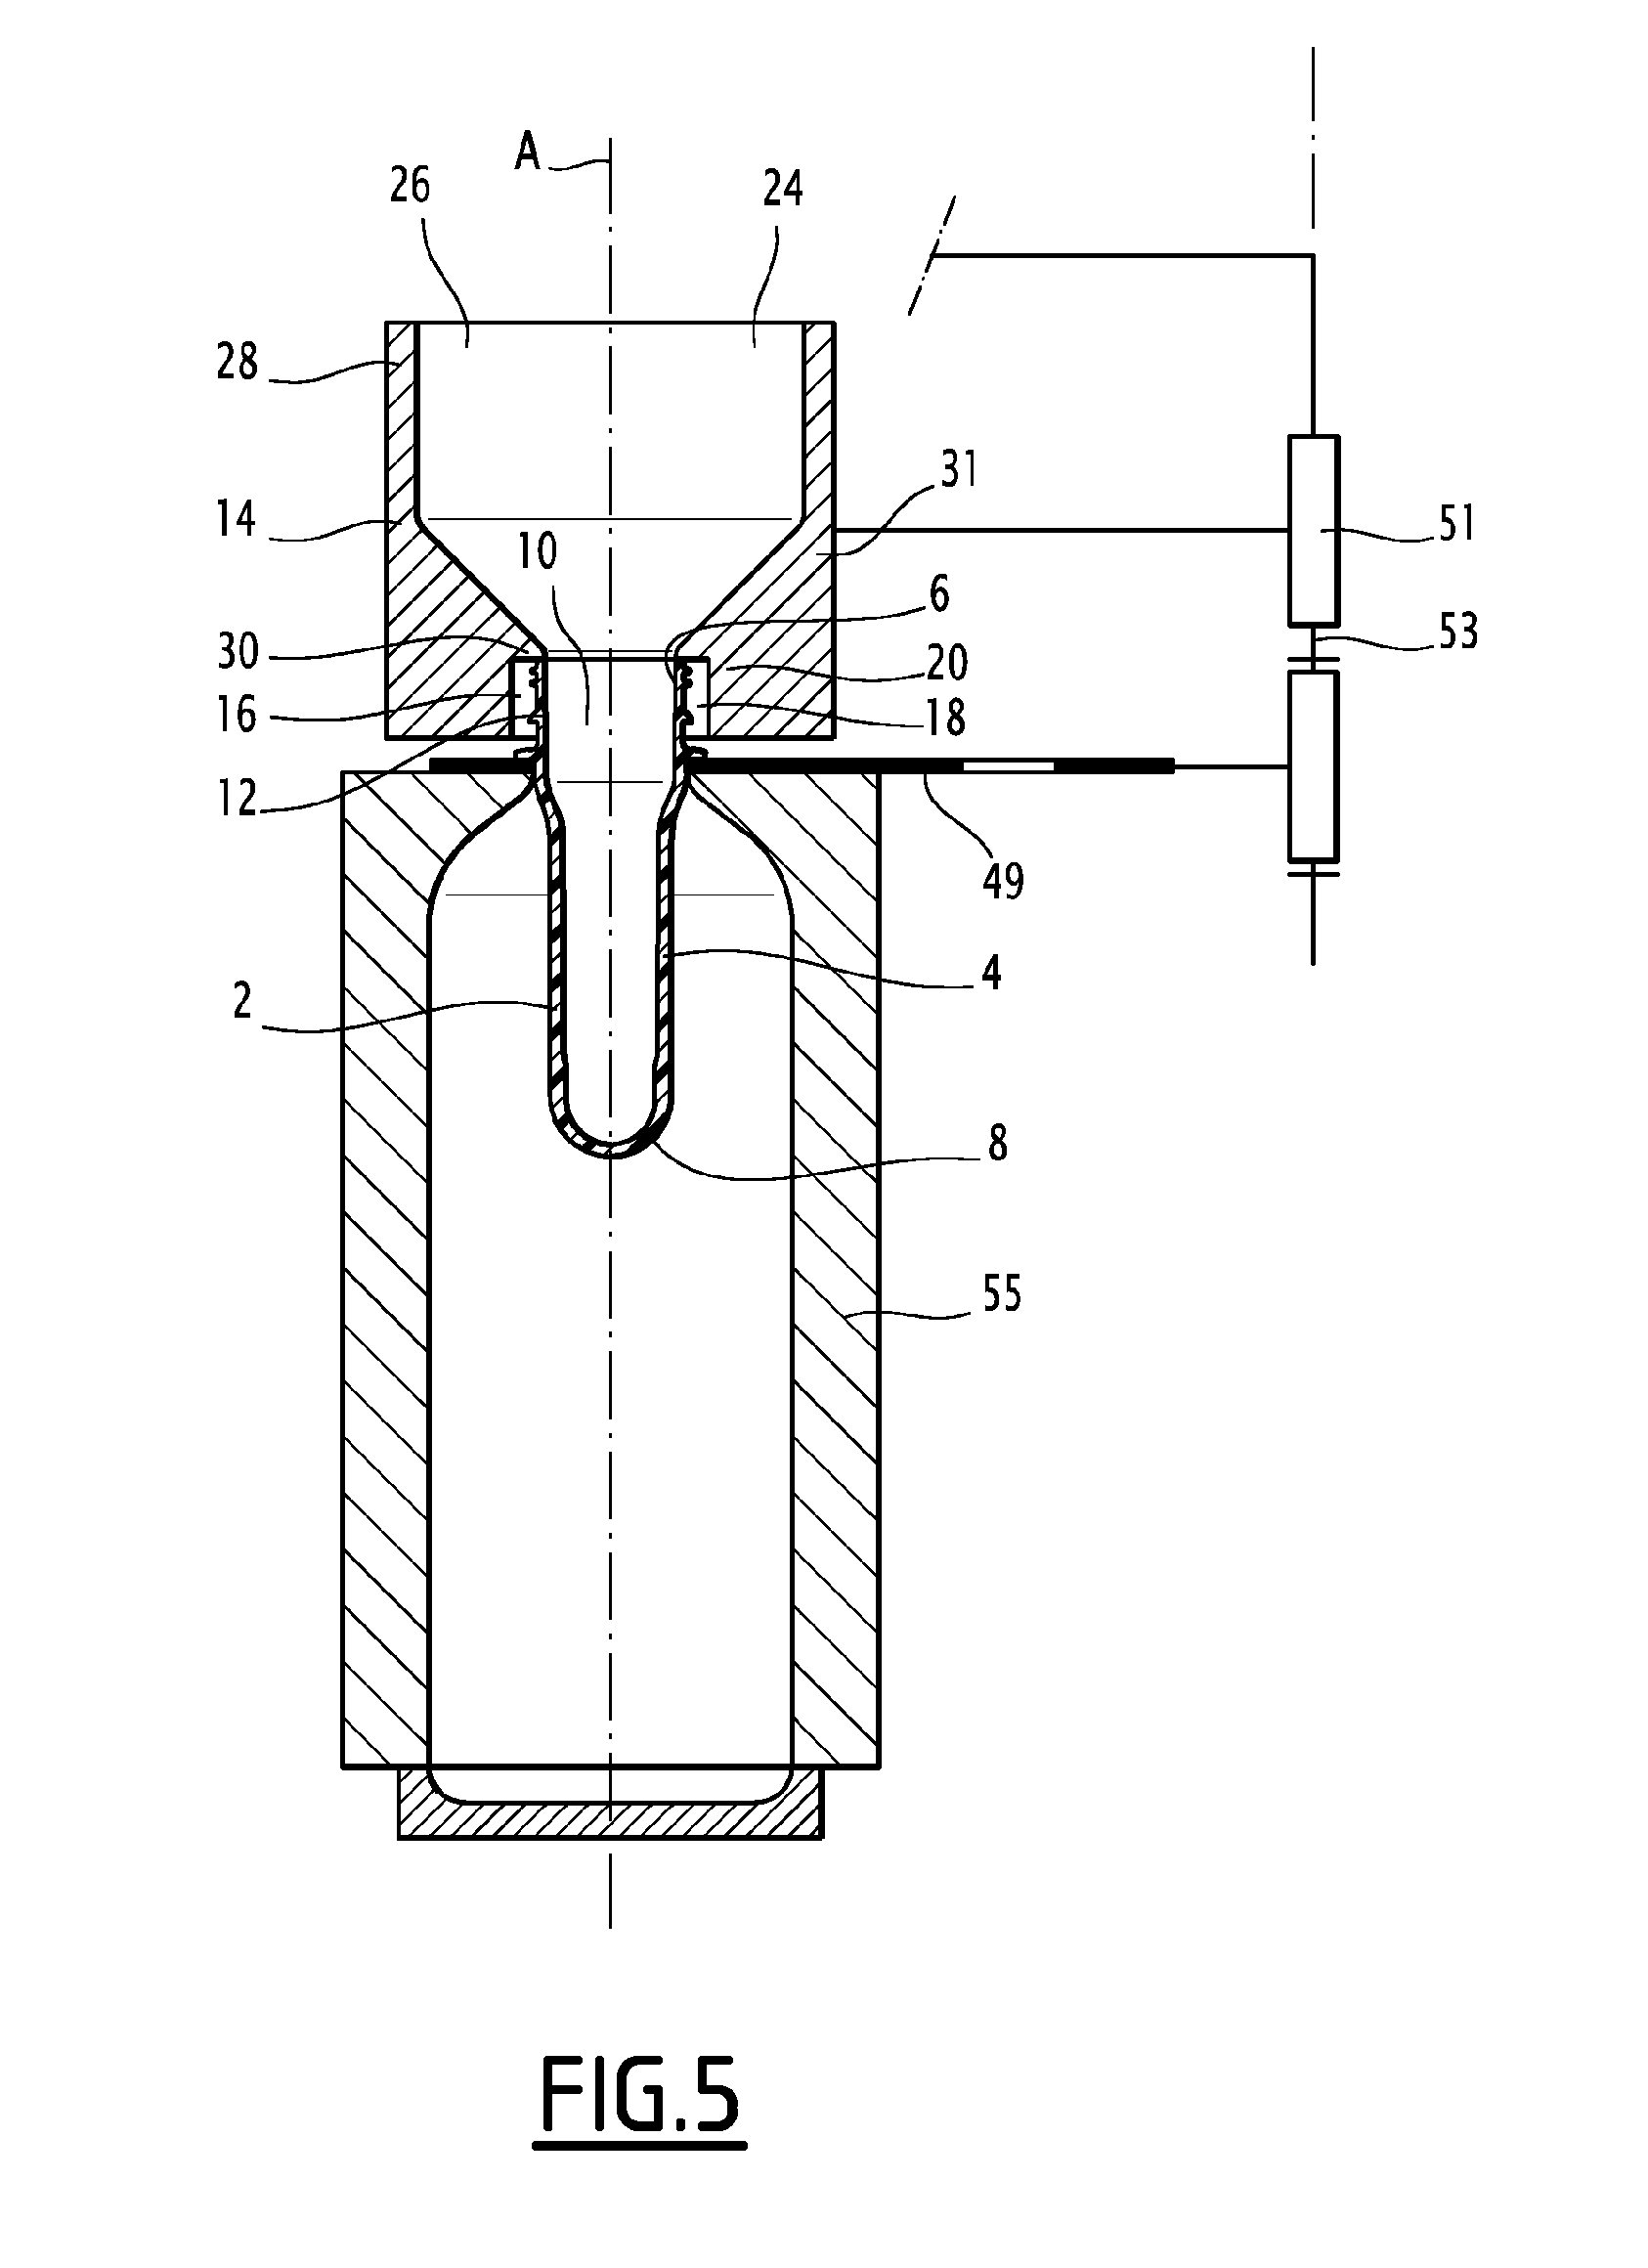 Extension device for the neck of a container formed in a machine for forming containers from preforms